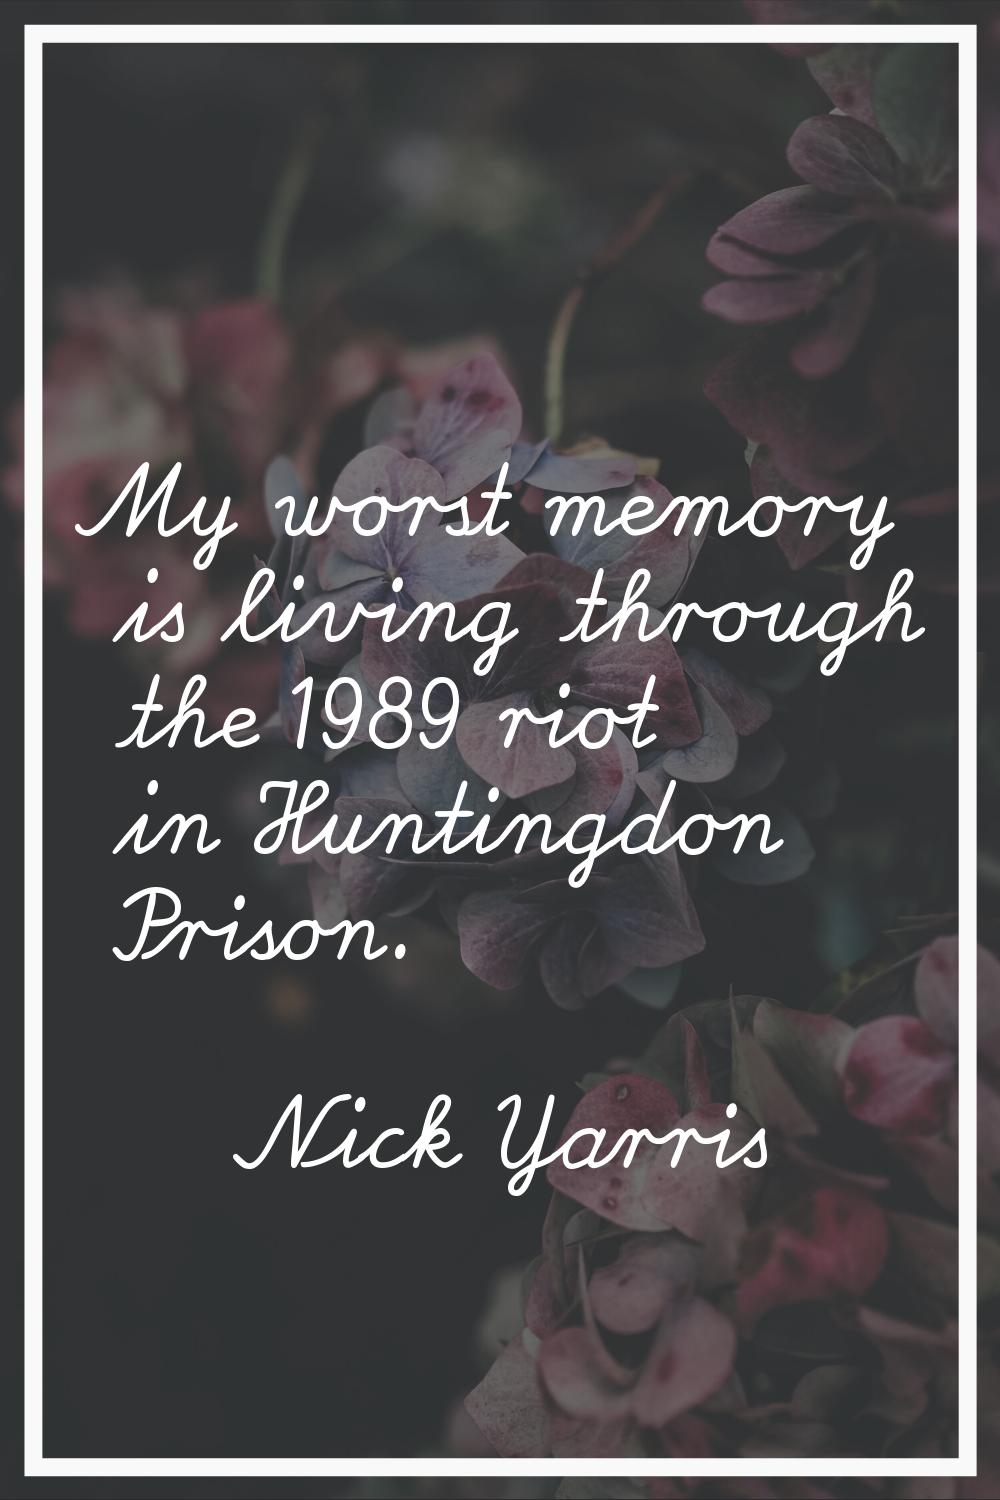 My worst memory is living through the 1989 riot in Huntingdon Prison.